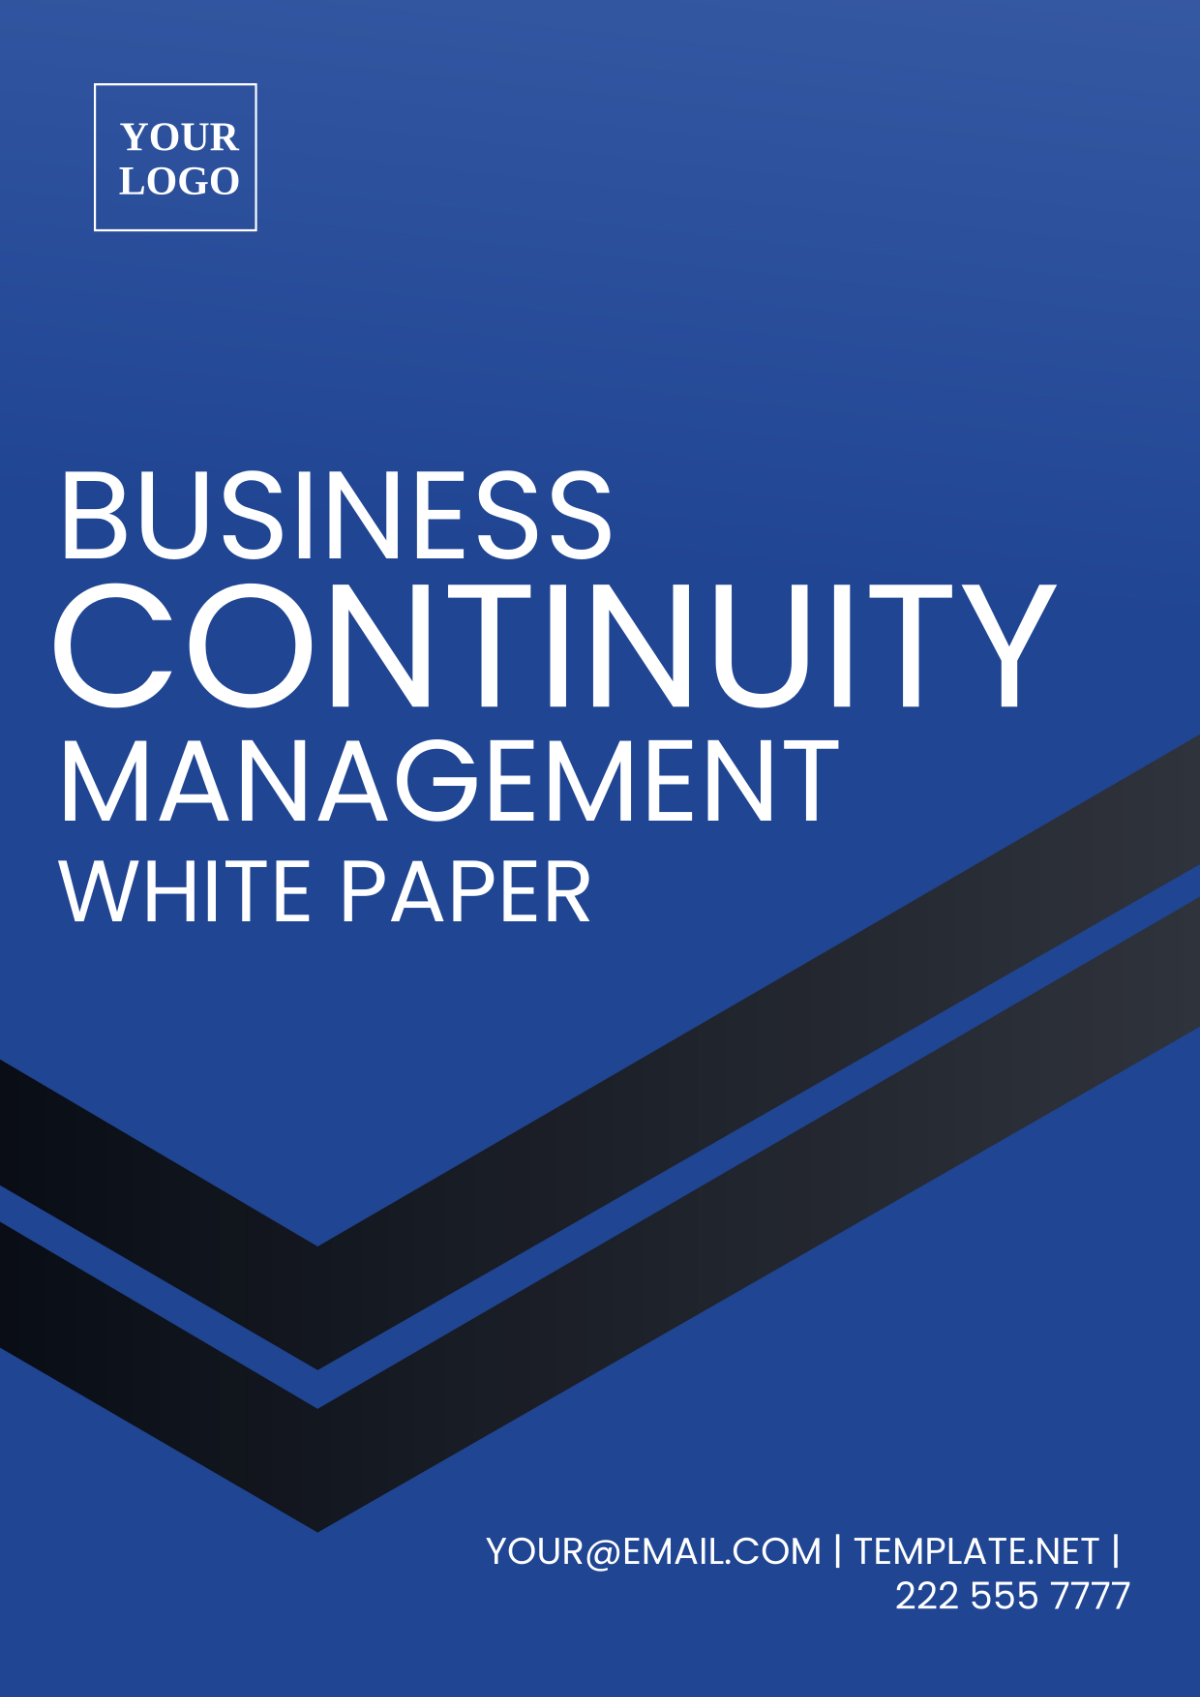 Business Continuity Management White Paper Template